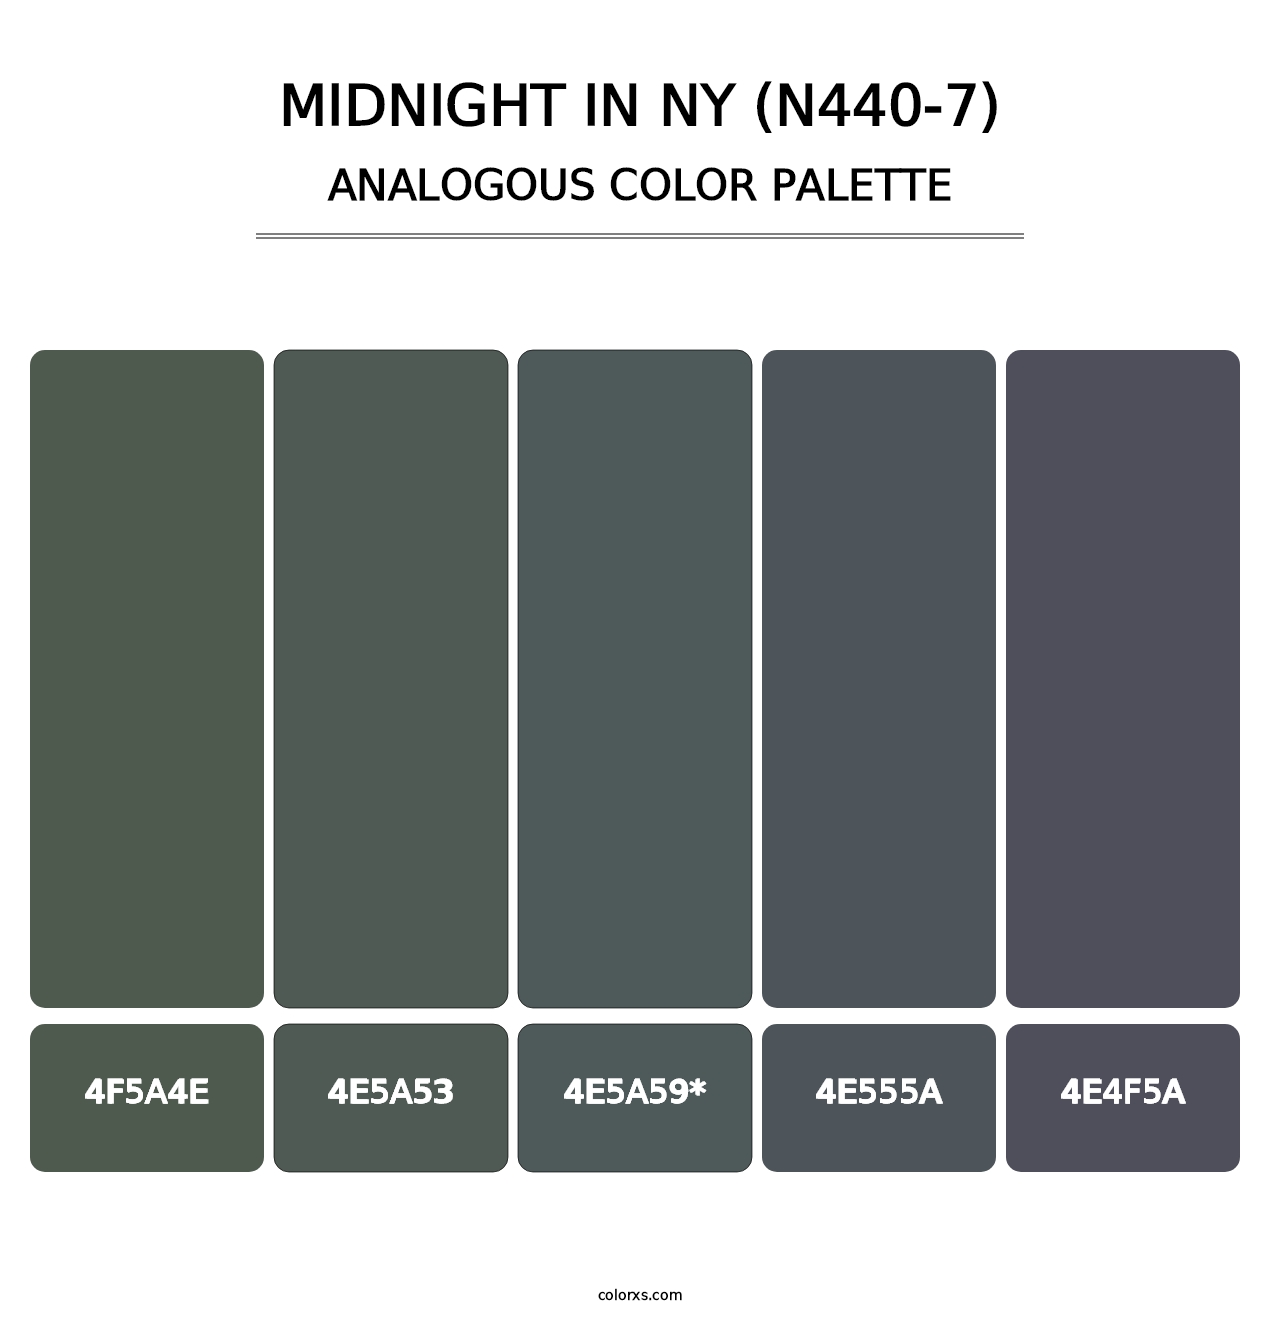 Midnight In Ny (N440-7) - Analogous Color Palette